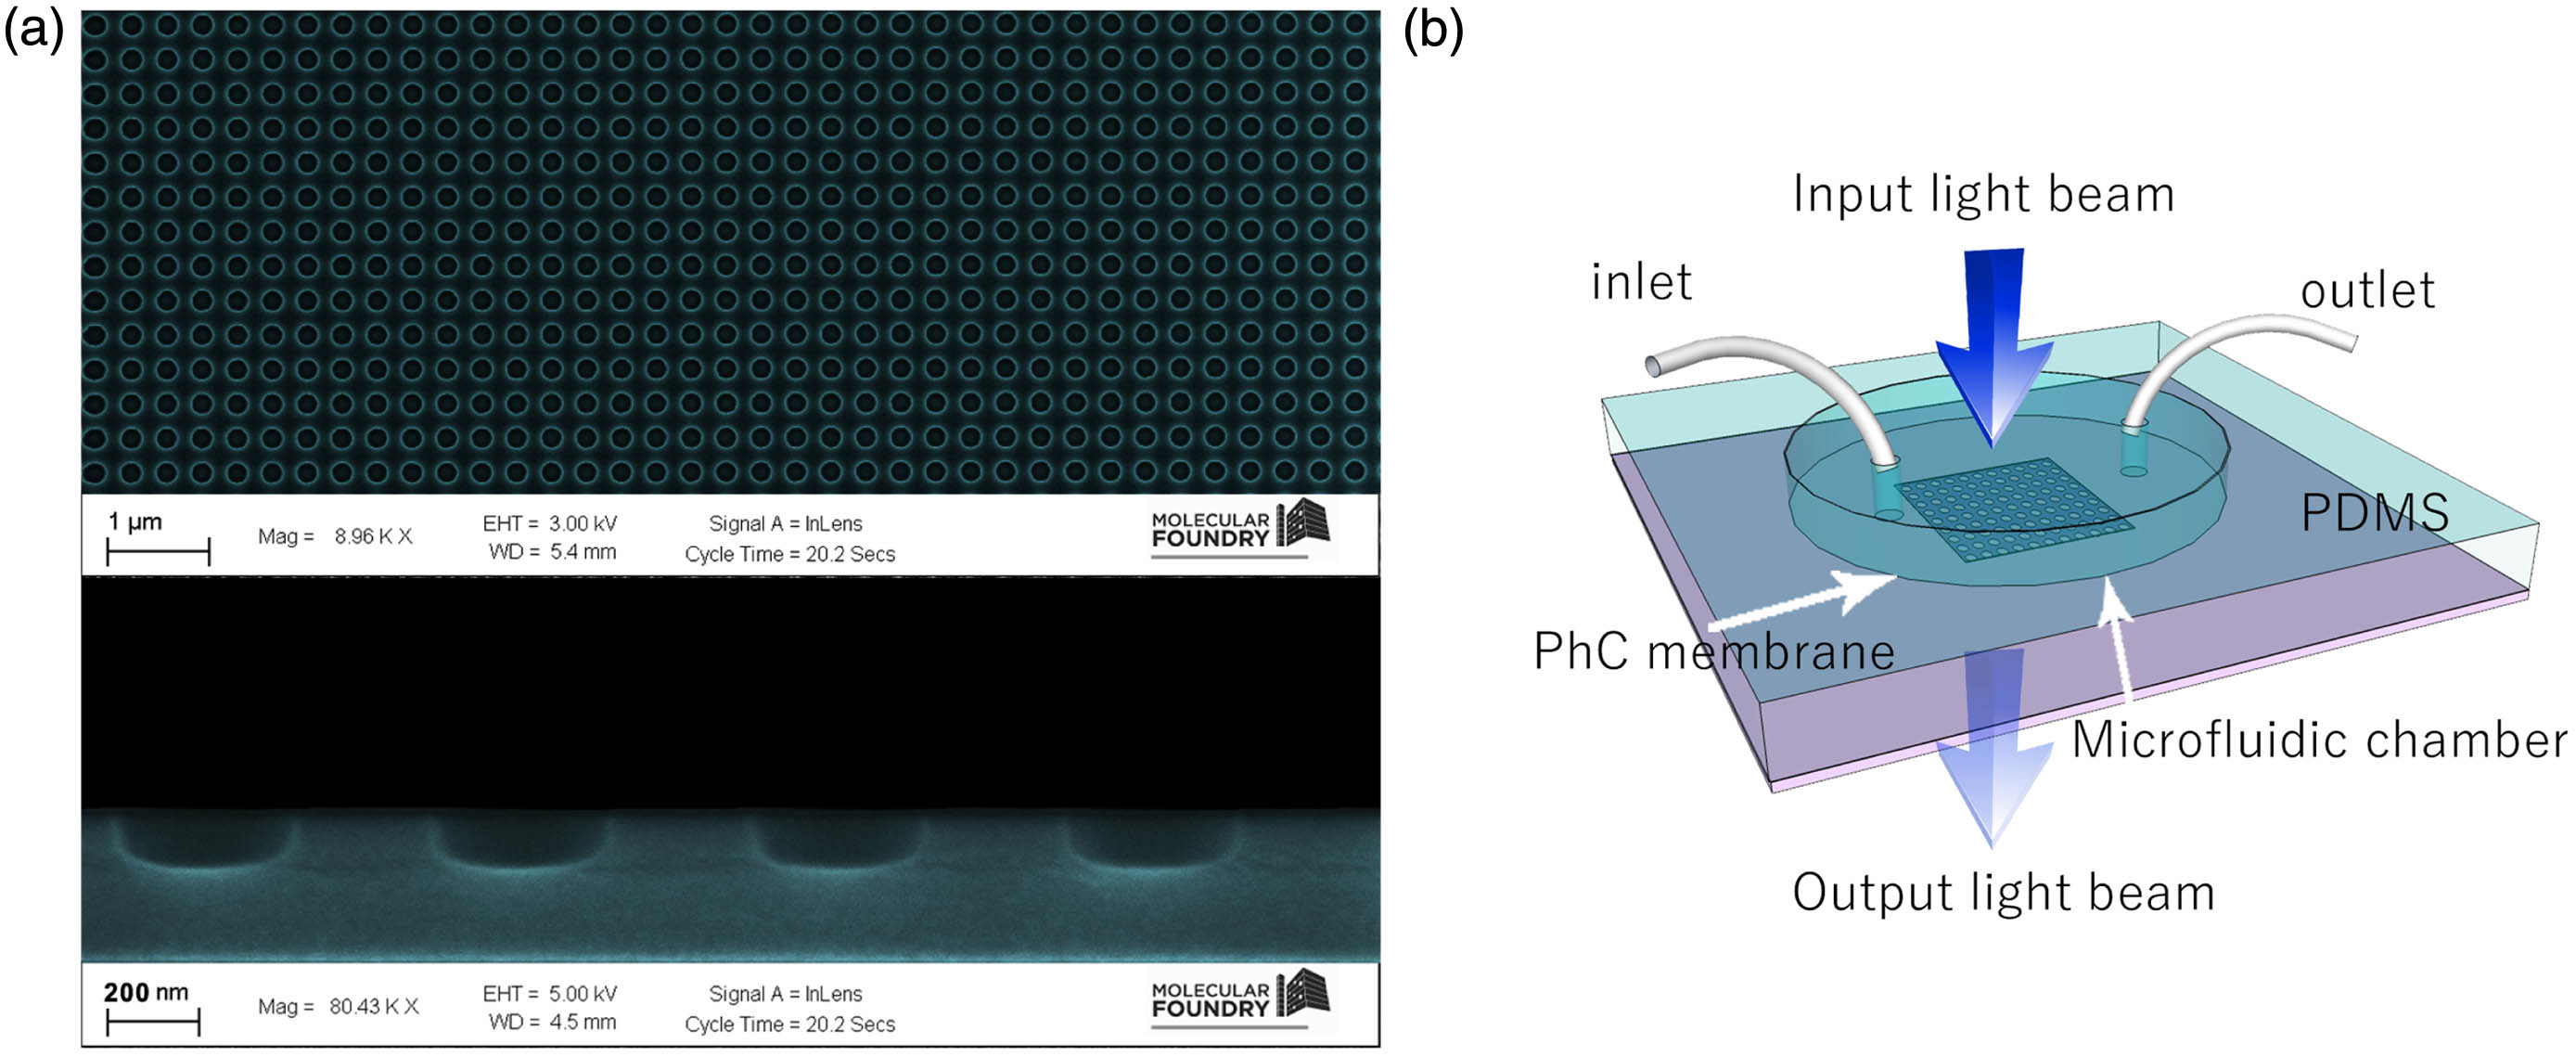 (a) Scanning electron microscopy image of the PhCM sample. The design consists of air cylindrical holes arranged in a square lattice (a=521 nm, r=130 nm, h=78 nm). (b) Sketch of the device: a PDMS microfluidic chamber was bonded to the PhCM. The inlet and outlet allow the controlled injection of the fluid.